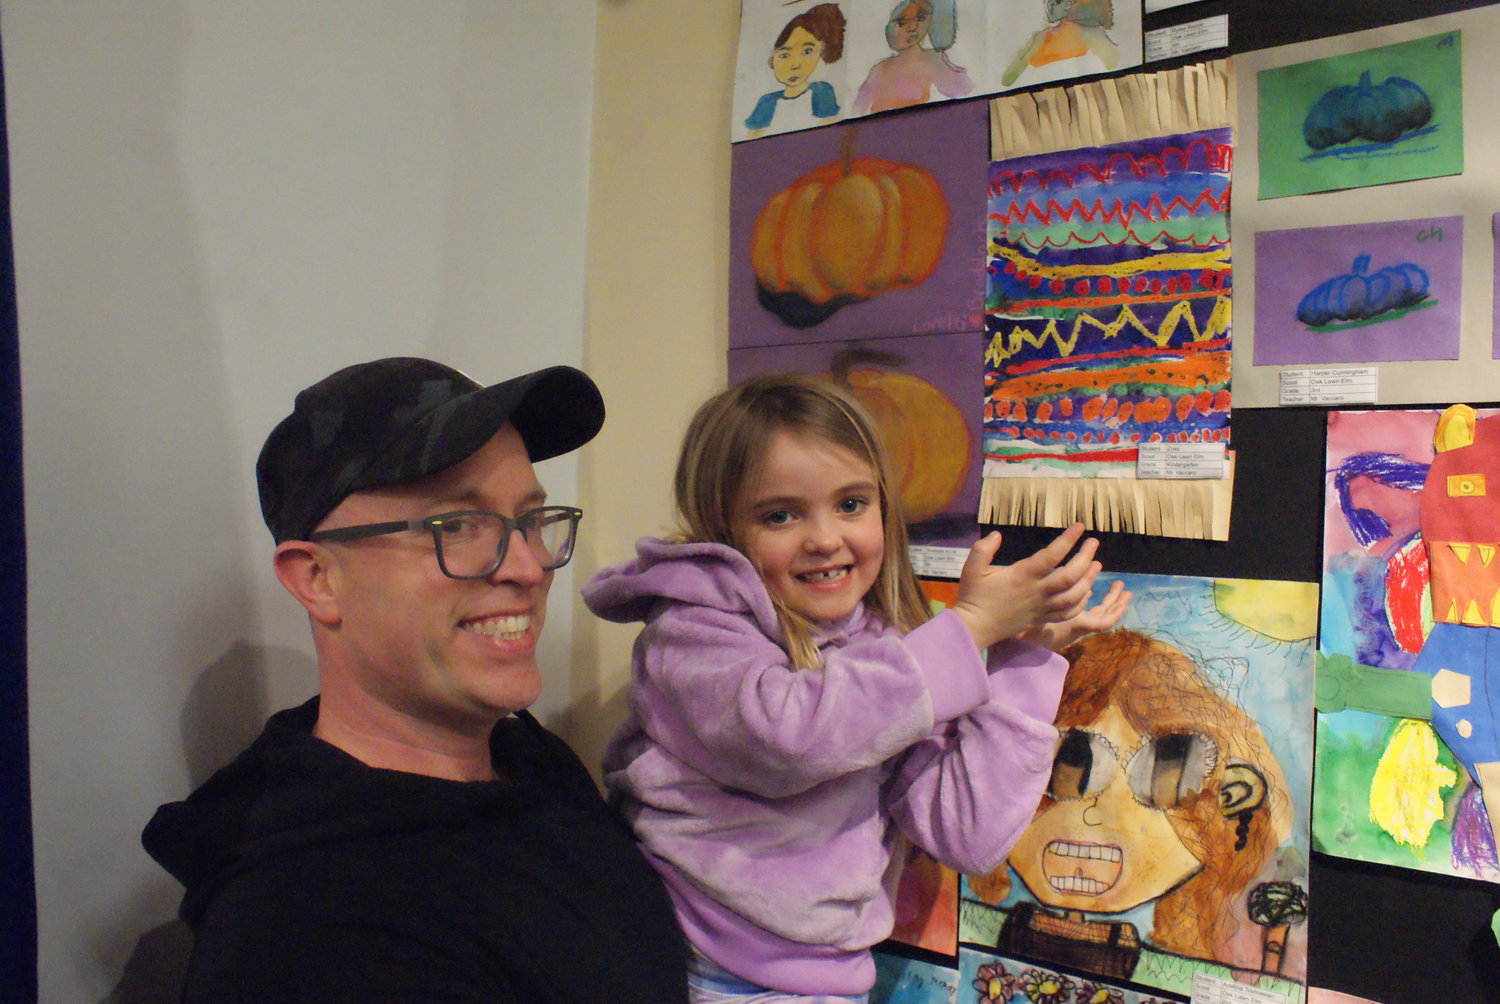 THE ART OF YOUTH: Zoey Tanguay , a 5 year old Kindergarten student at Oaklawn Elementary School proudly shows us her artwork, with the help of her dad Justin.